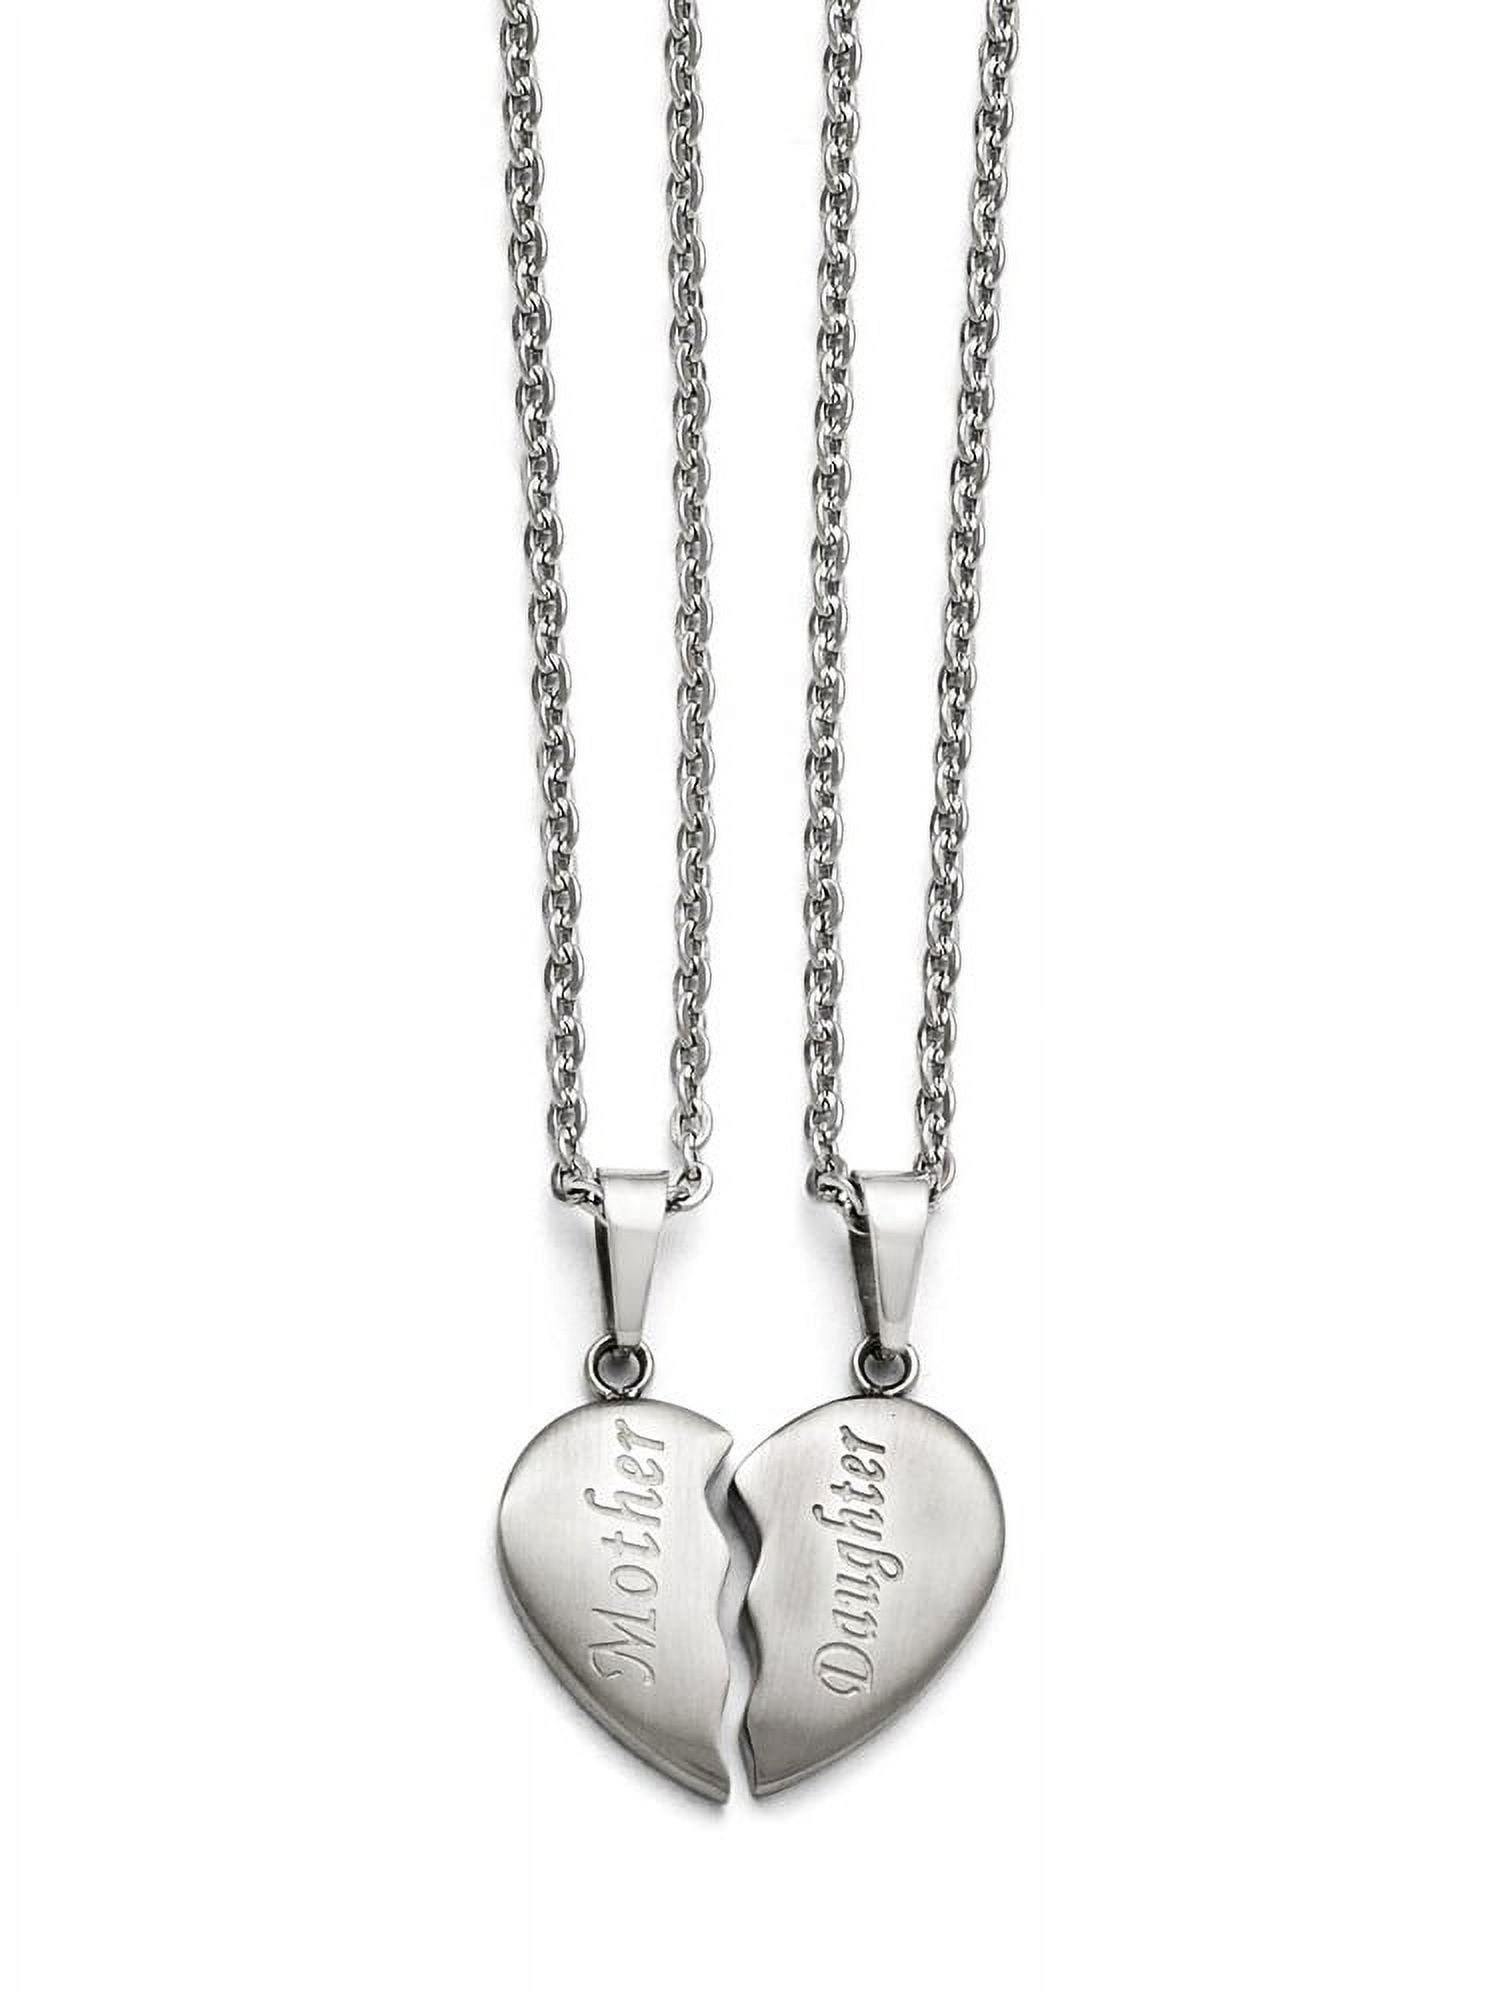 Mother and Daughter Silver Hearts Necklace Set - The Vintage Pearl